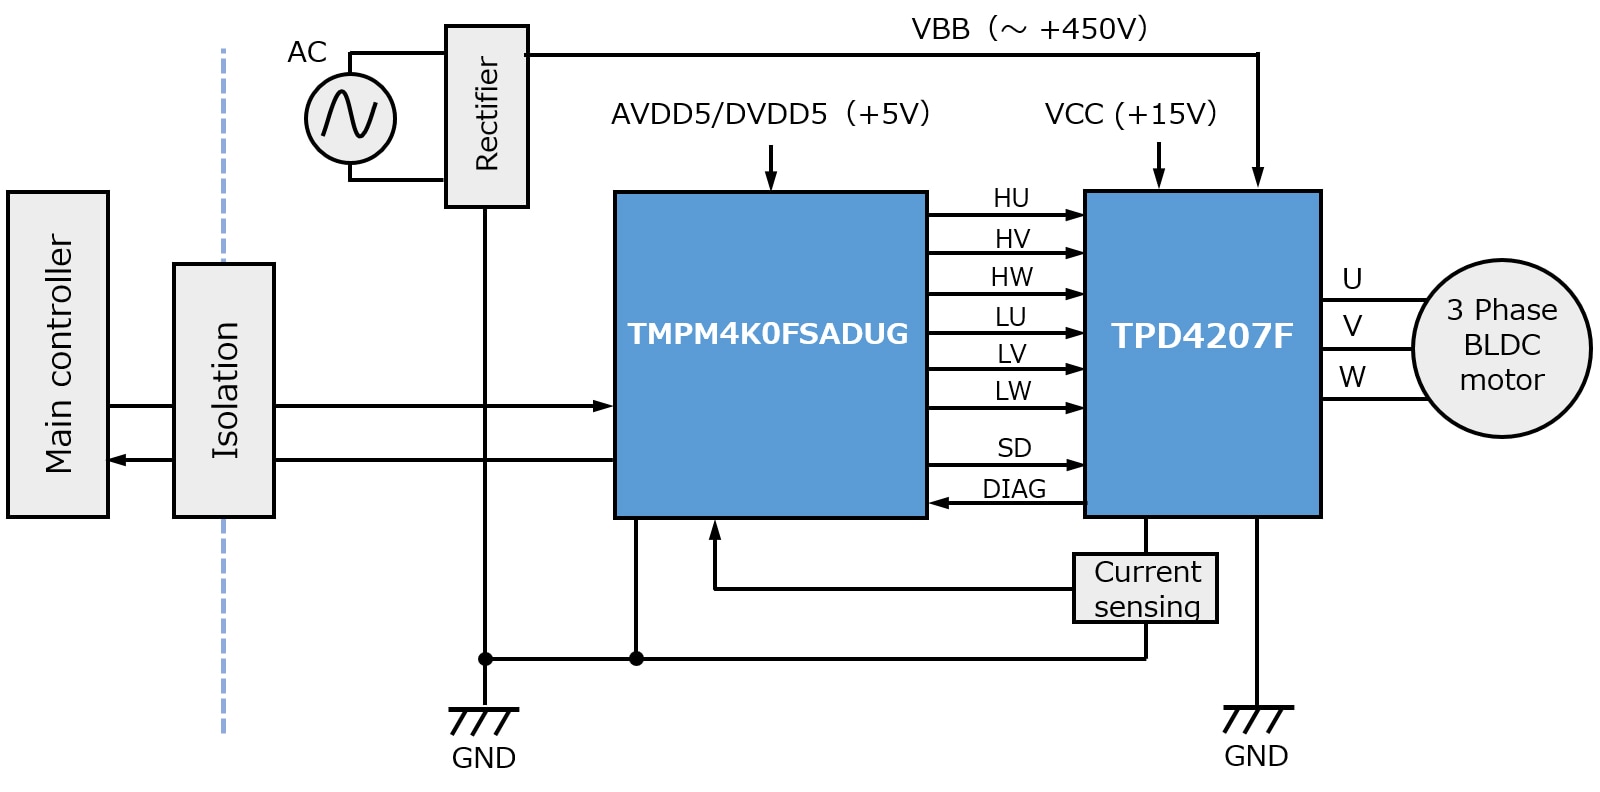 Application block diagram of application circuit of TPD4207F for small compressor motor drive.